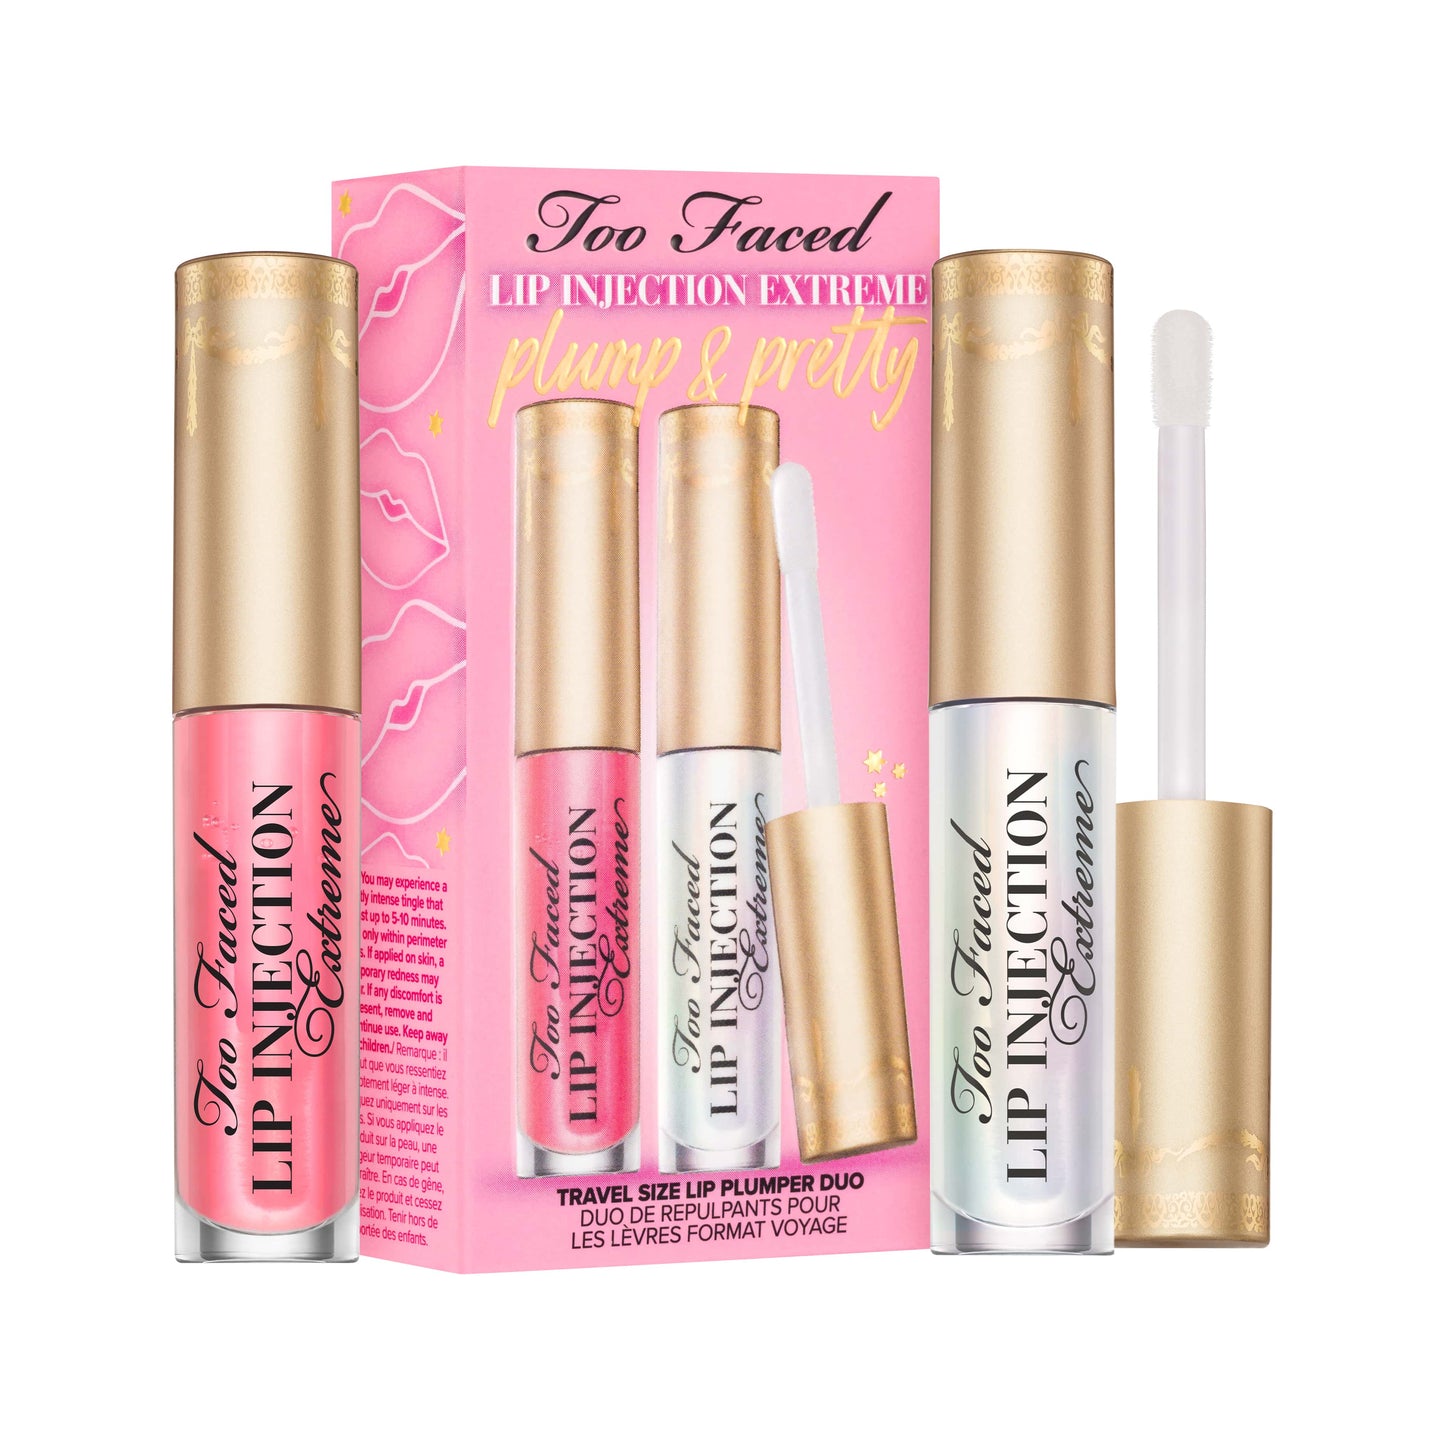 Too Faced - Lip Injection Extreme Plump & Pretty: Travel Size Lip Plumper Duo